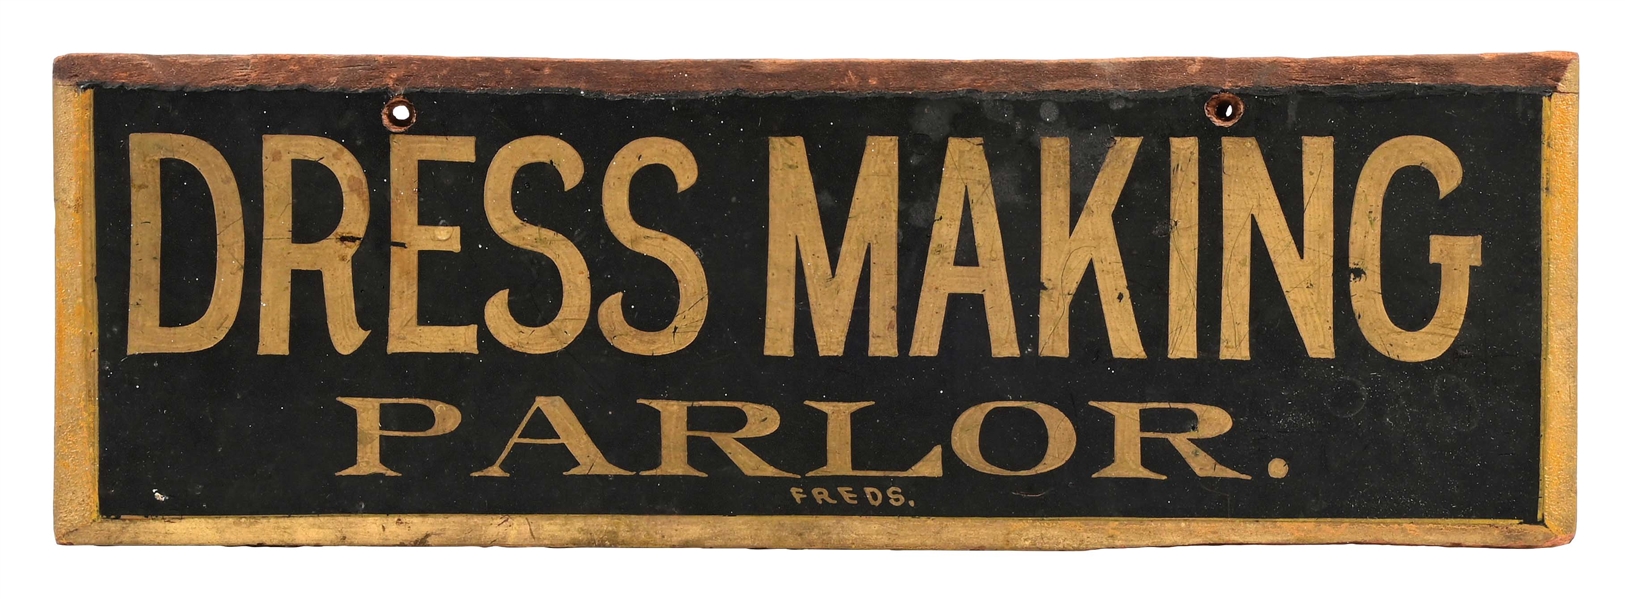 DRESS MAKING PARLOR HAND PAINTED WOOD SIGN.